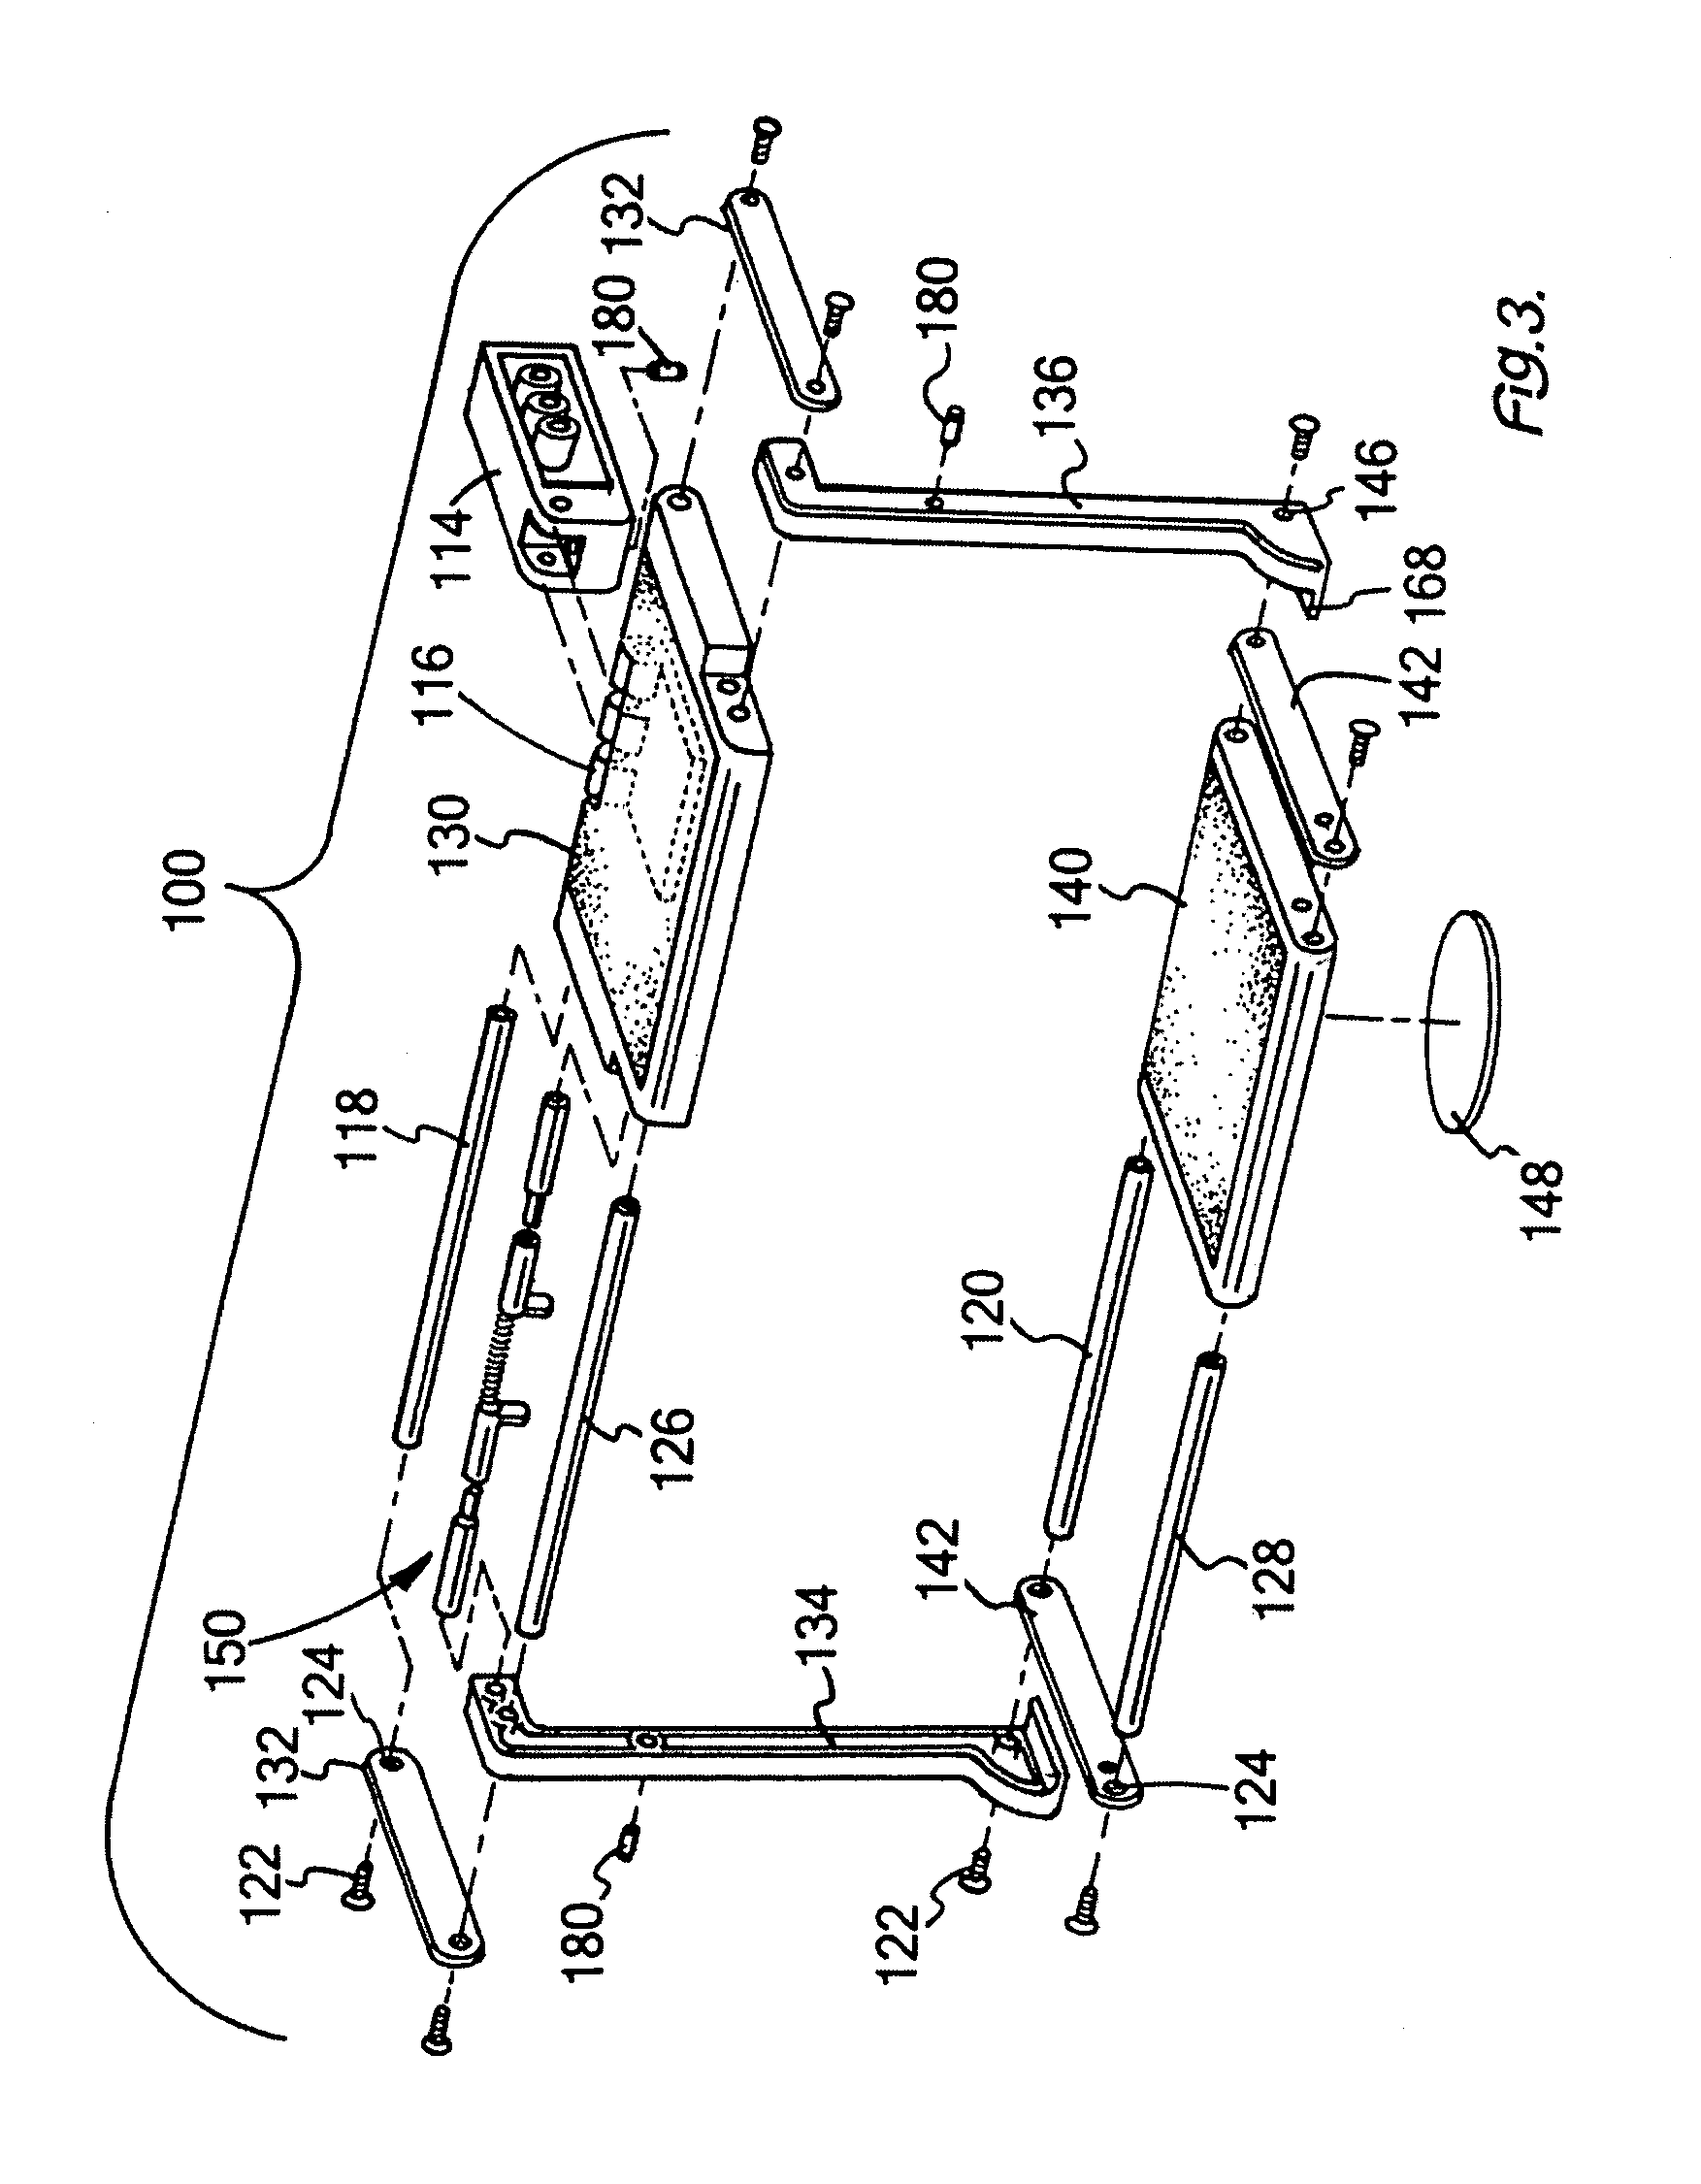 Step assembly for use with a vehicle